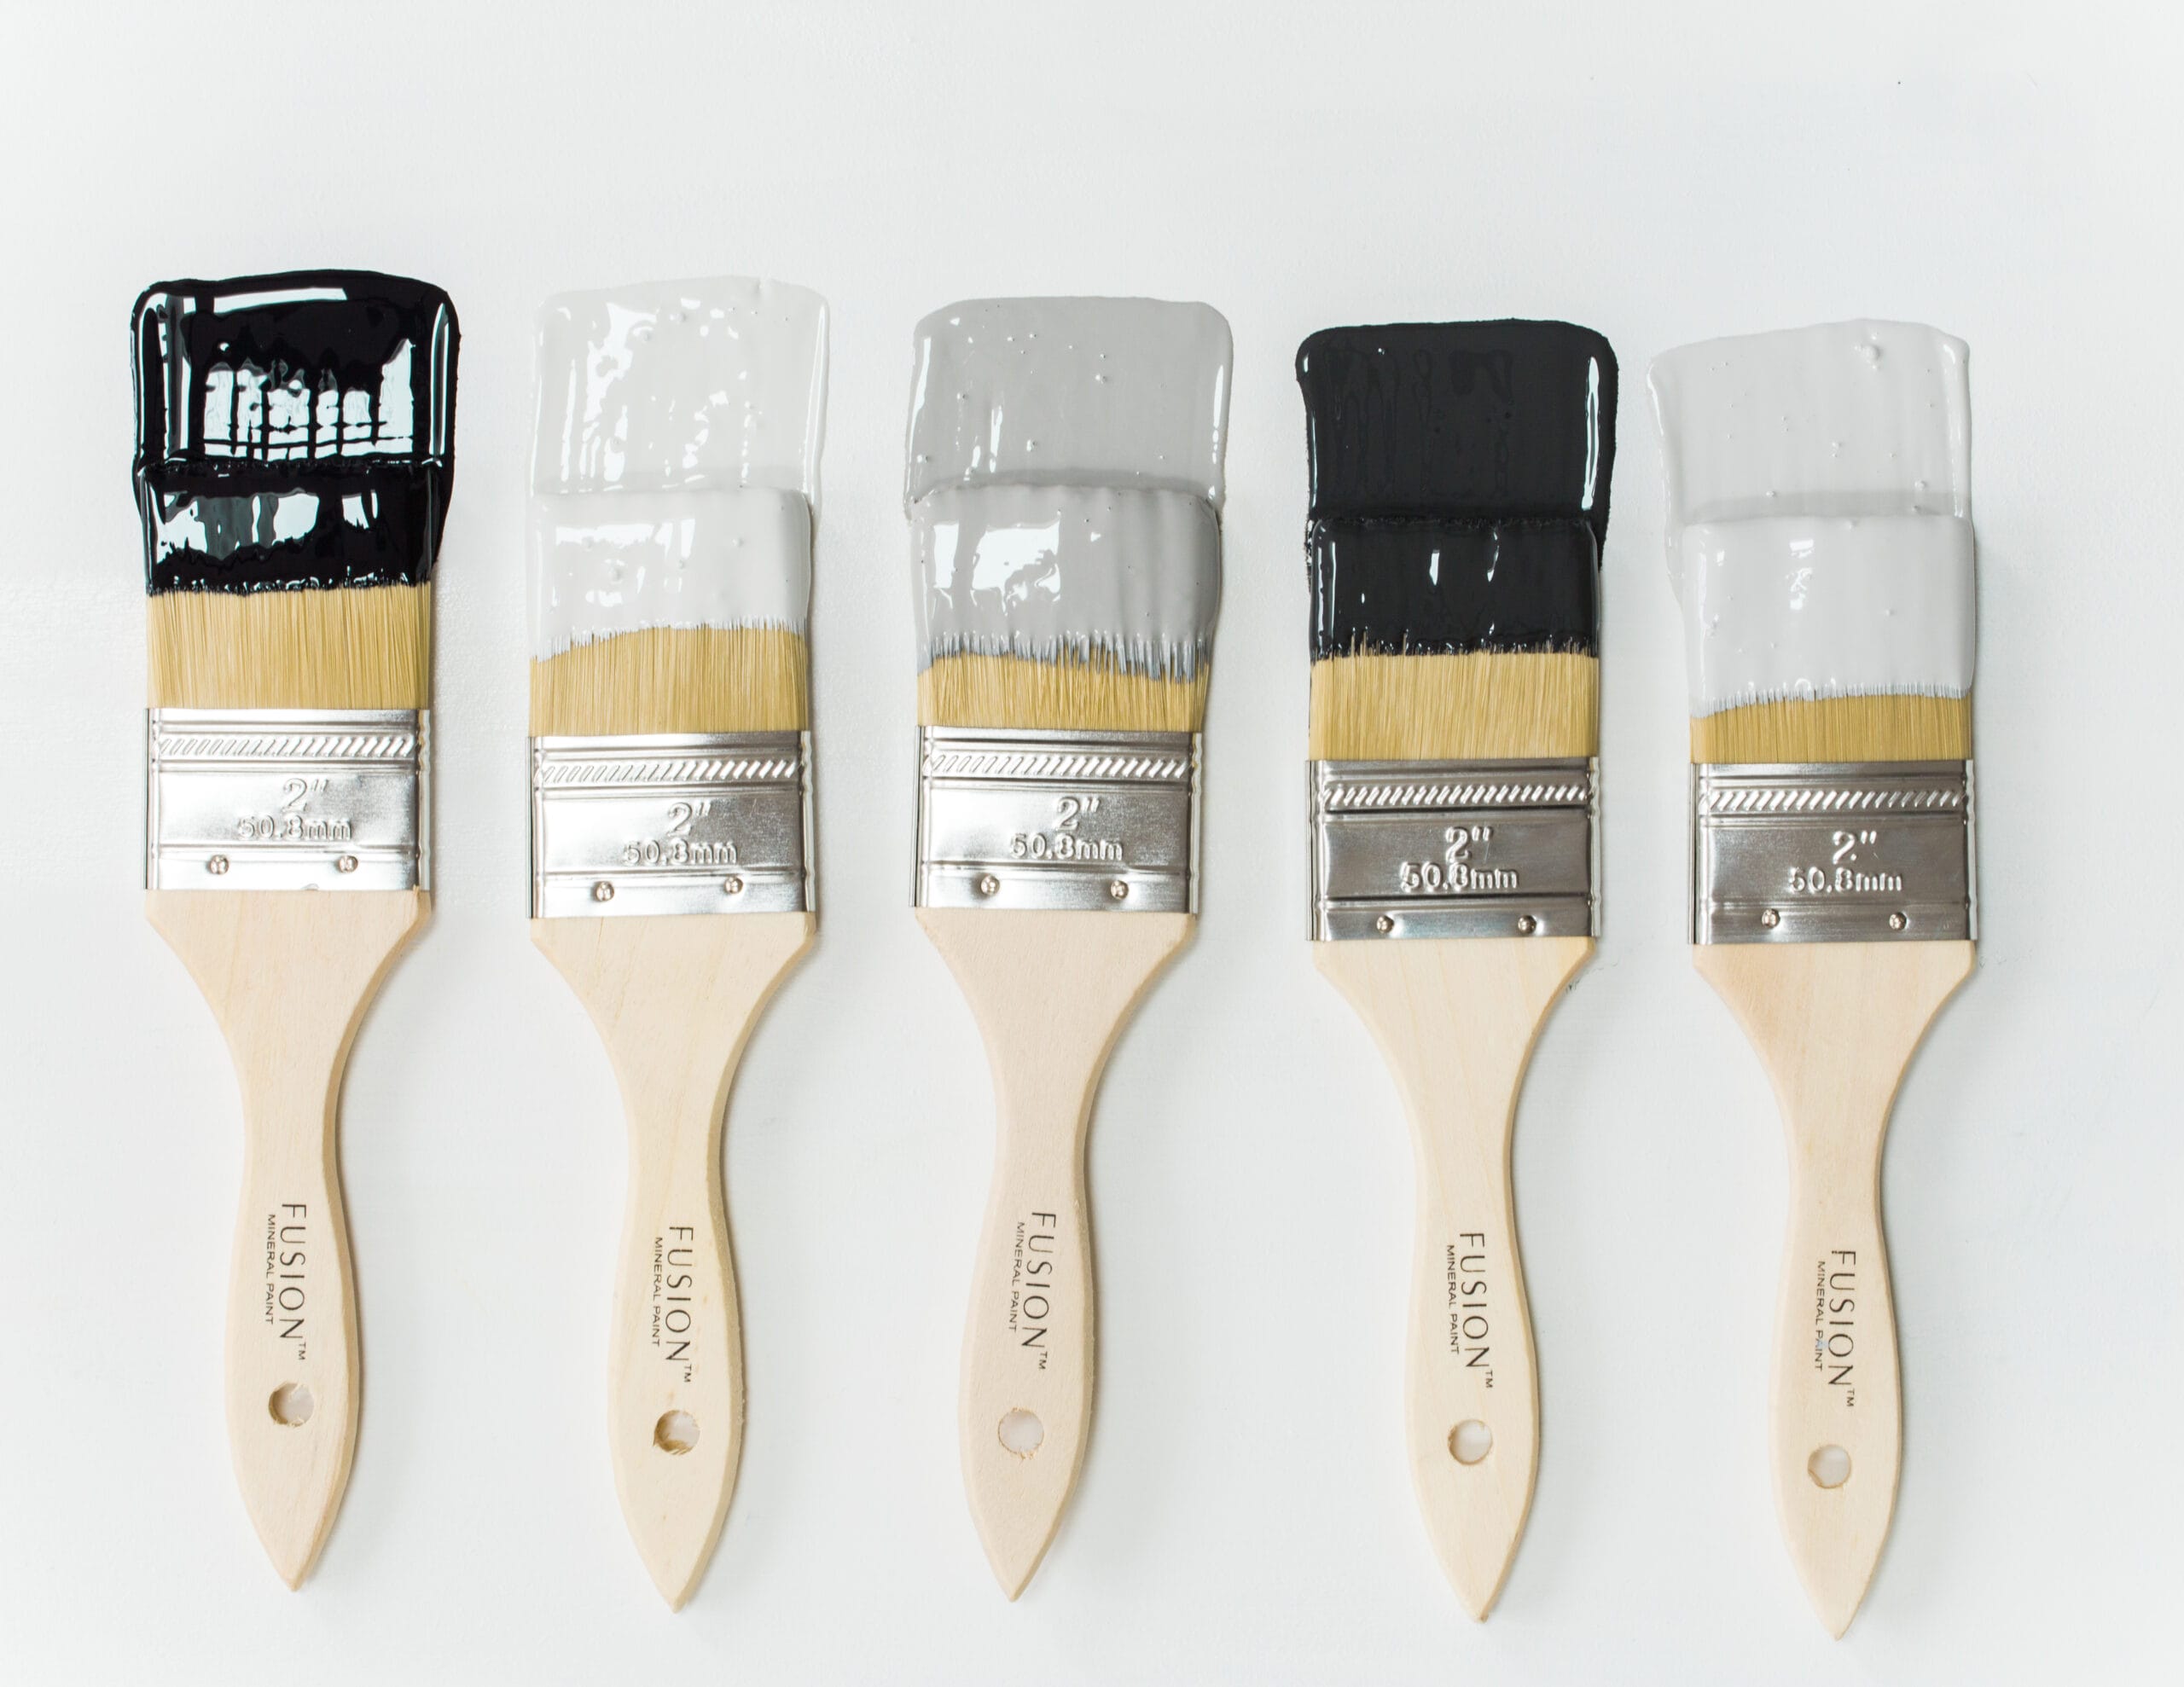 Discover Fusion Mineral Paint: A Guide to Retailers and Stockists in the UK